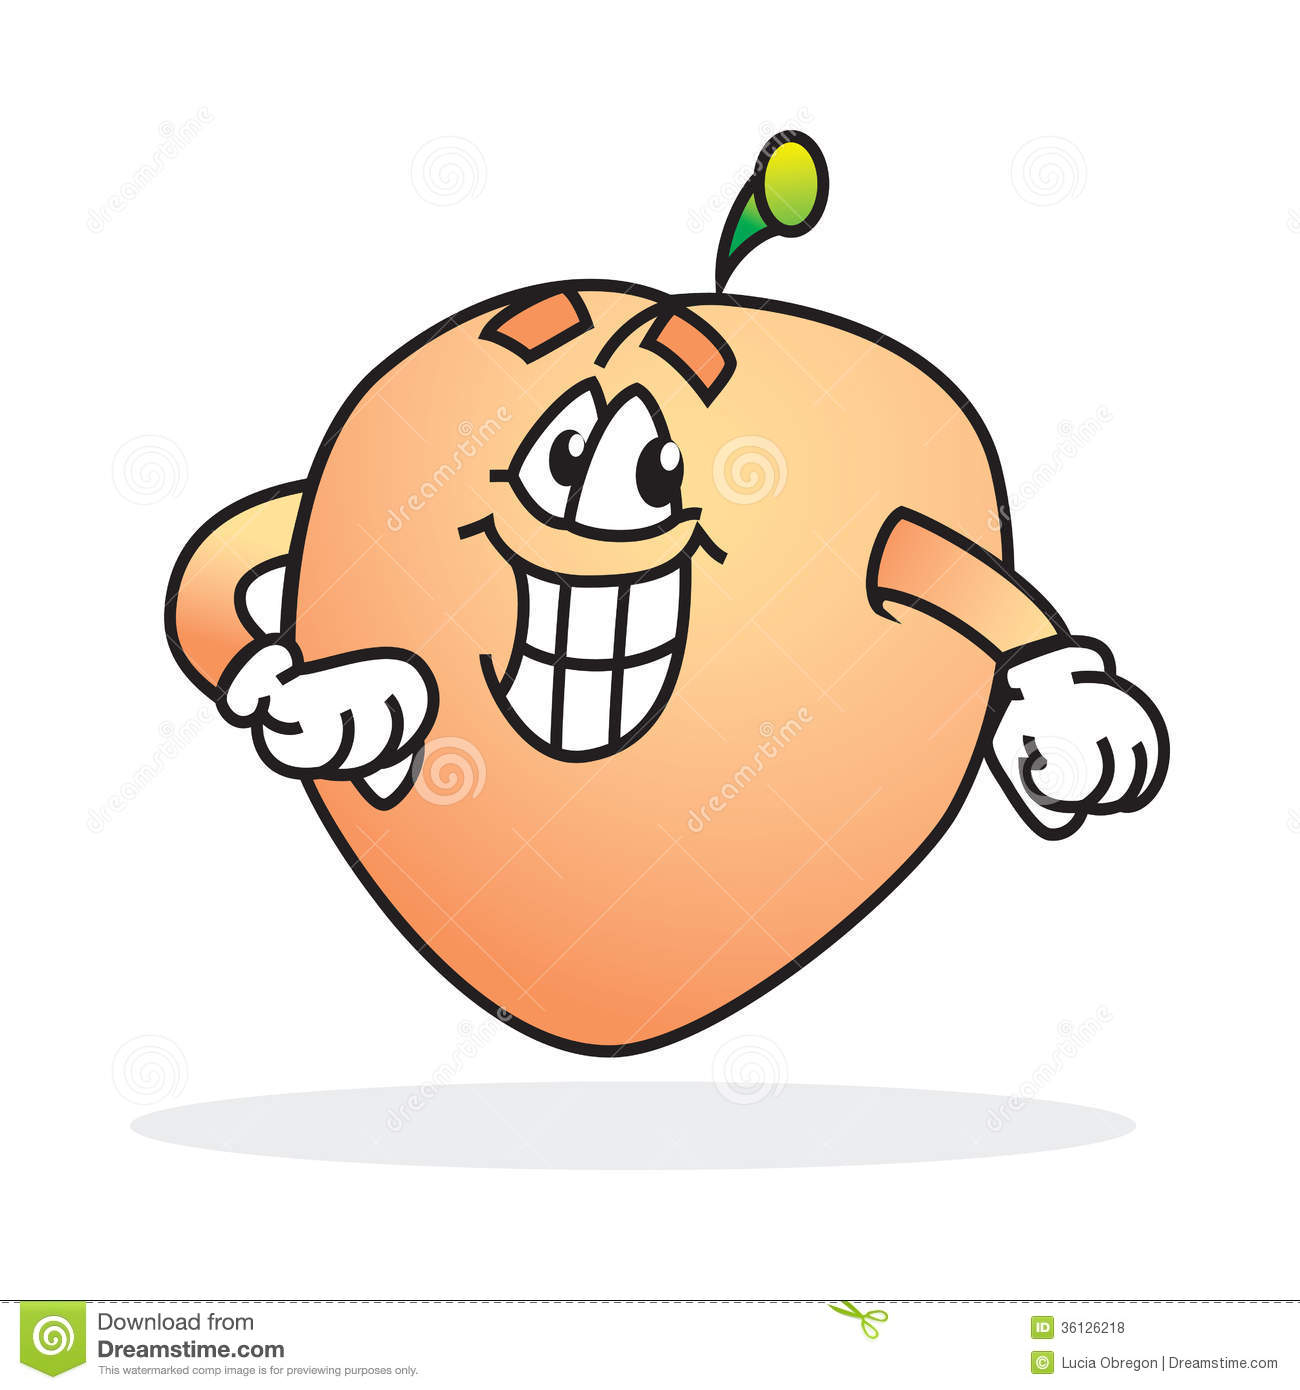 Silly Smiling Peach Royalty Free Stock Photos   Image  36126218